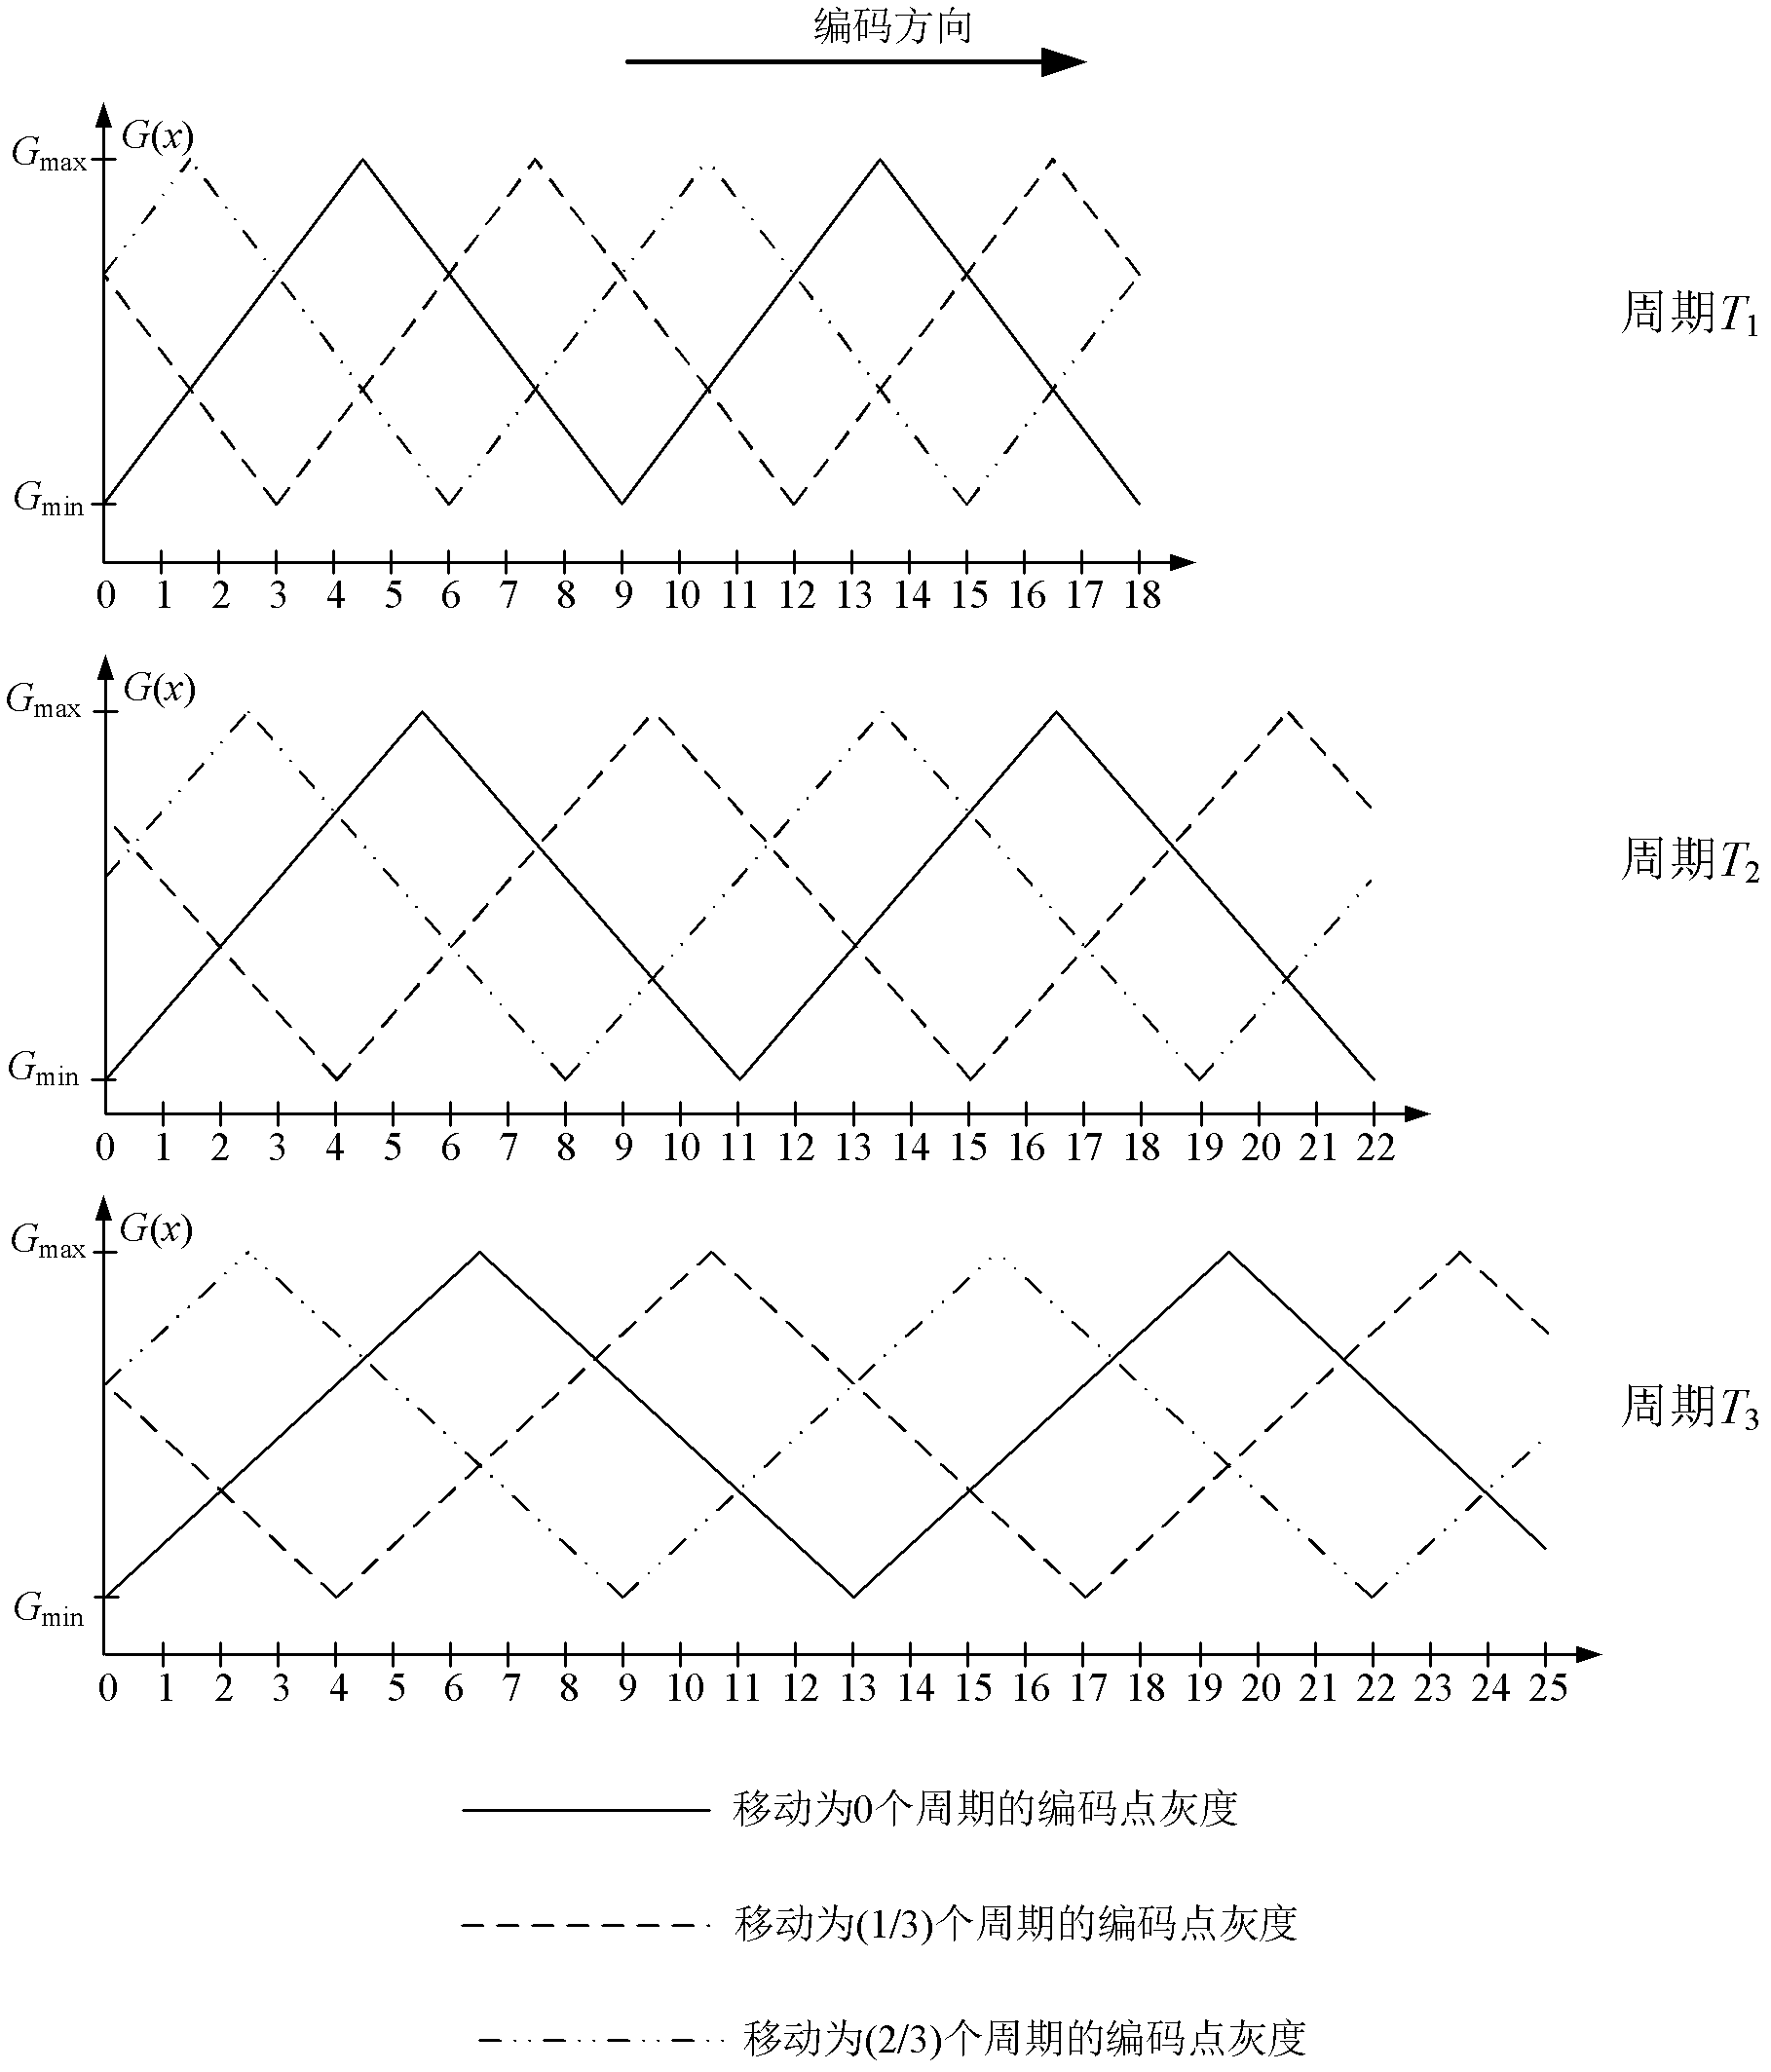 Three-dimensional information acquisition method for sampling points of three gray level symmetrical linear coding periods